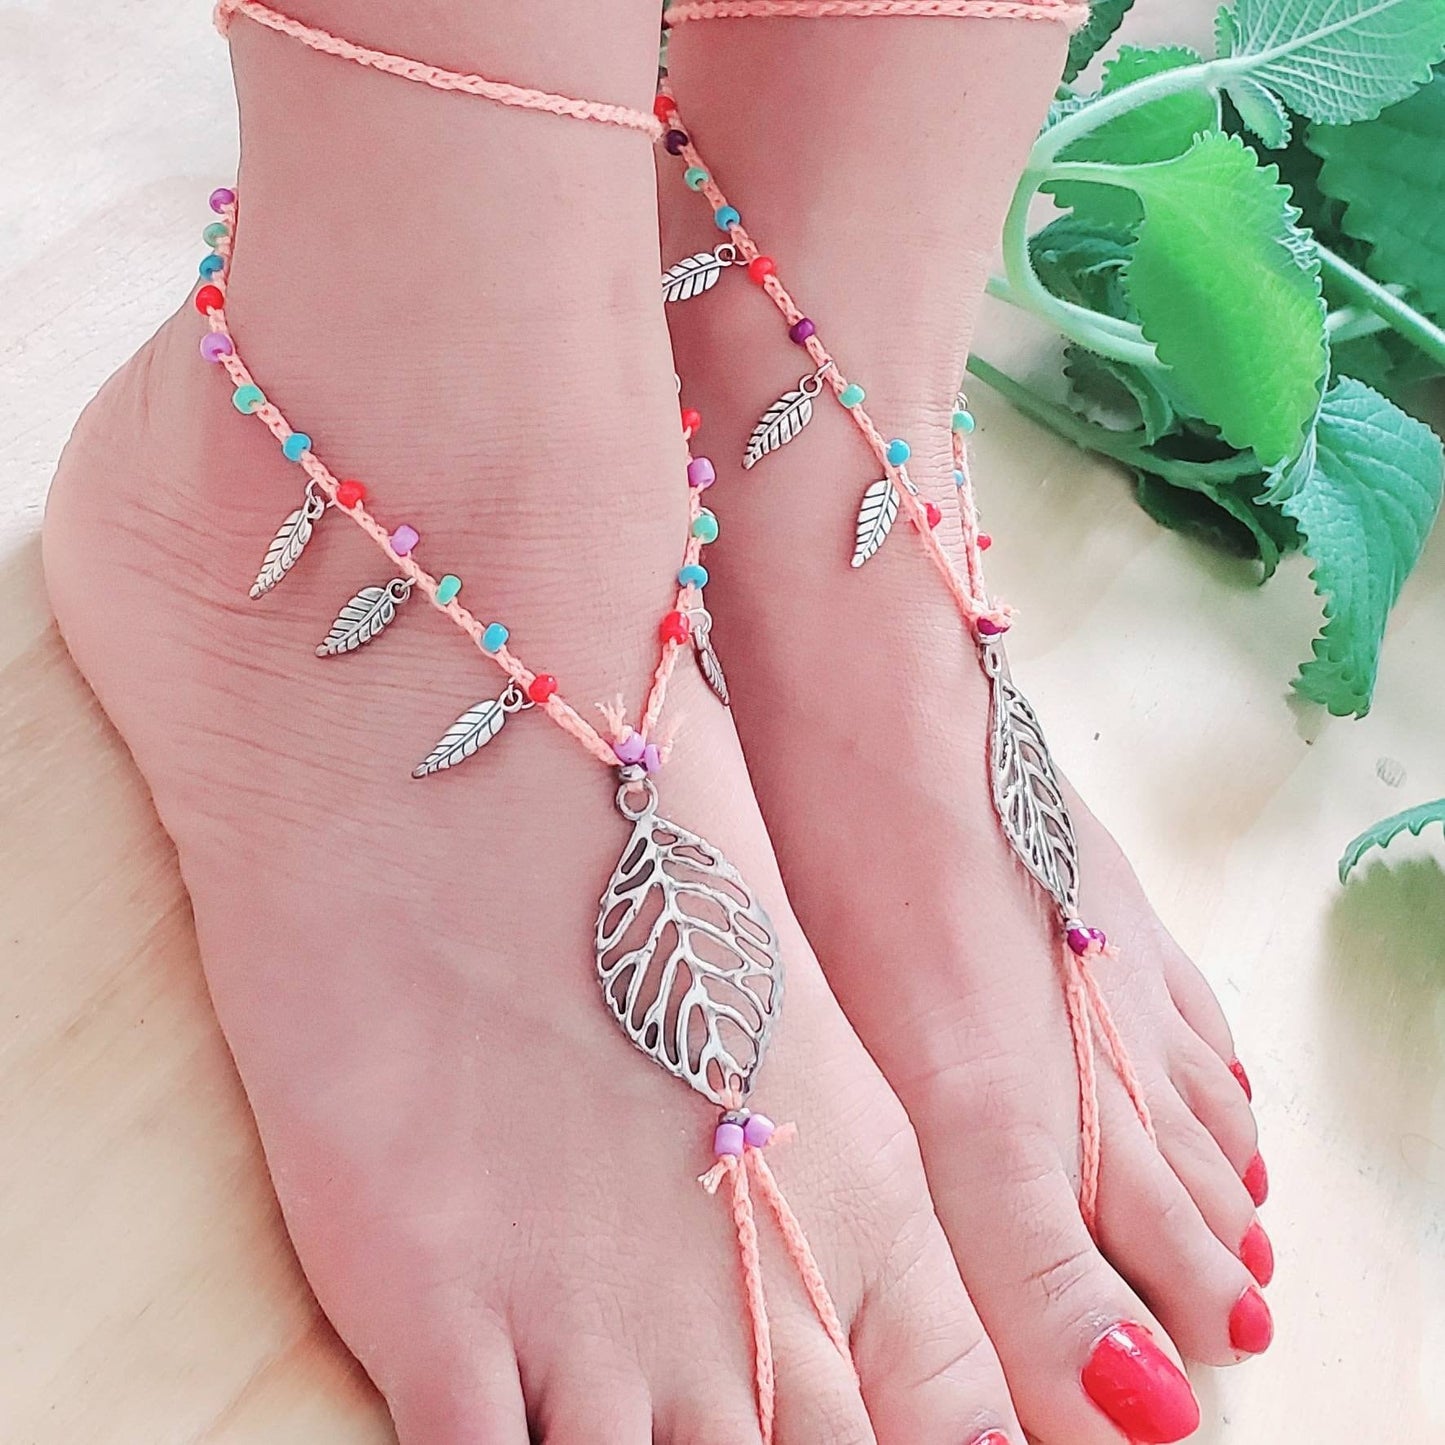 Boho barefoot sandals, hippie sandals,foot jewelry,anklet for women,barefoot sandals,lace barefoot sandals,yoga shoes, bridal sandals